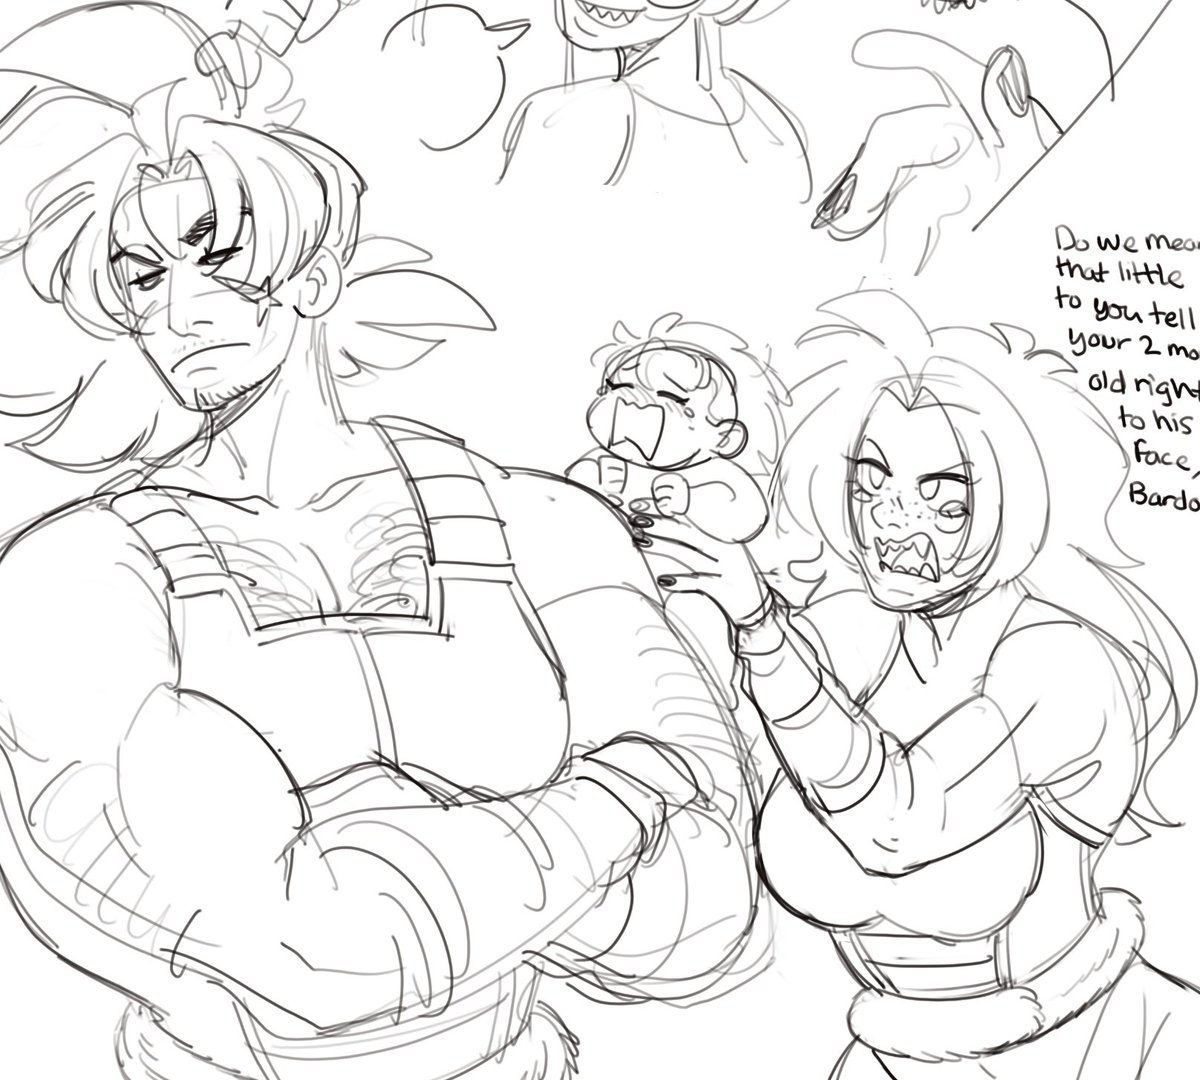 (wip) I wouldn't be crucified for z bardock's a shitty dad/partner agenda right 